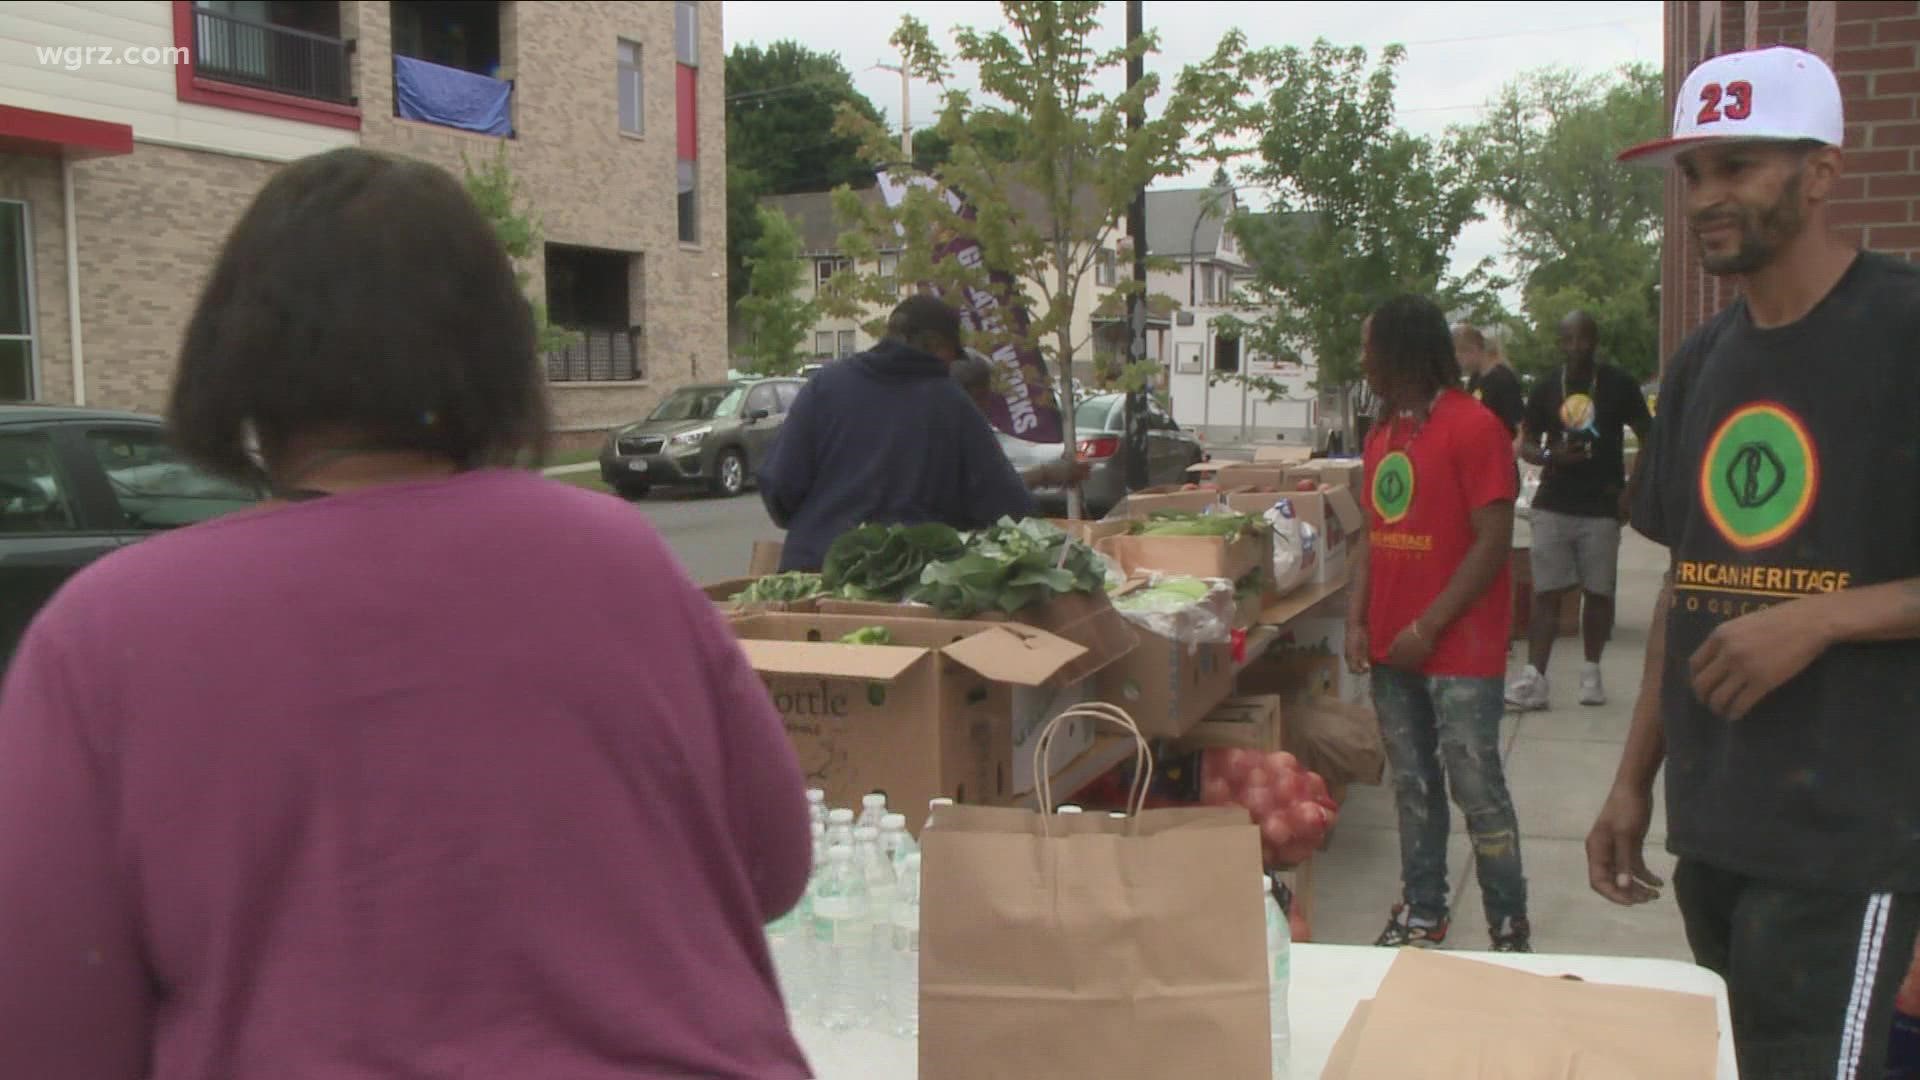 Organizations join to provide food assistance